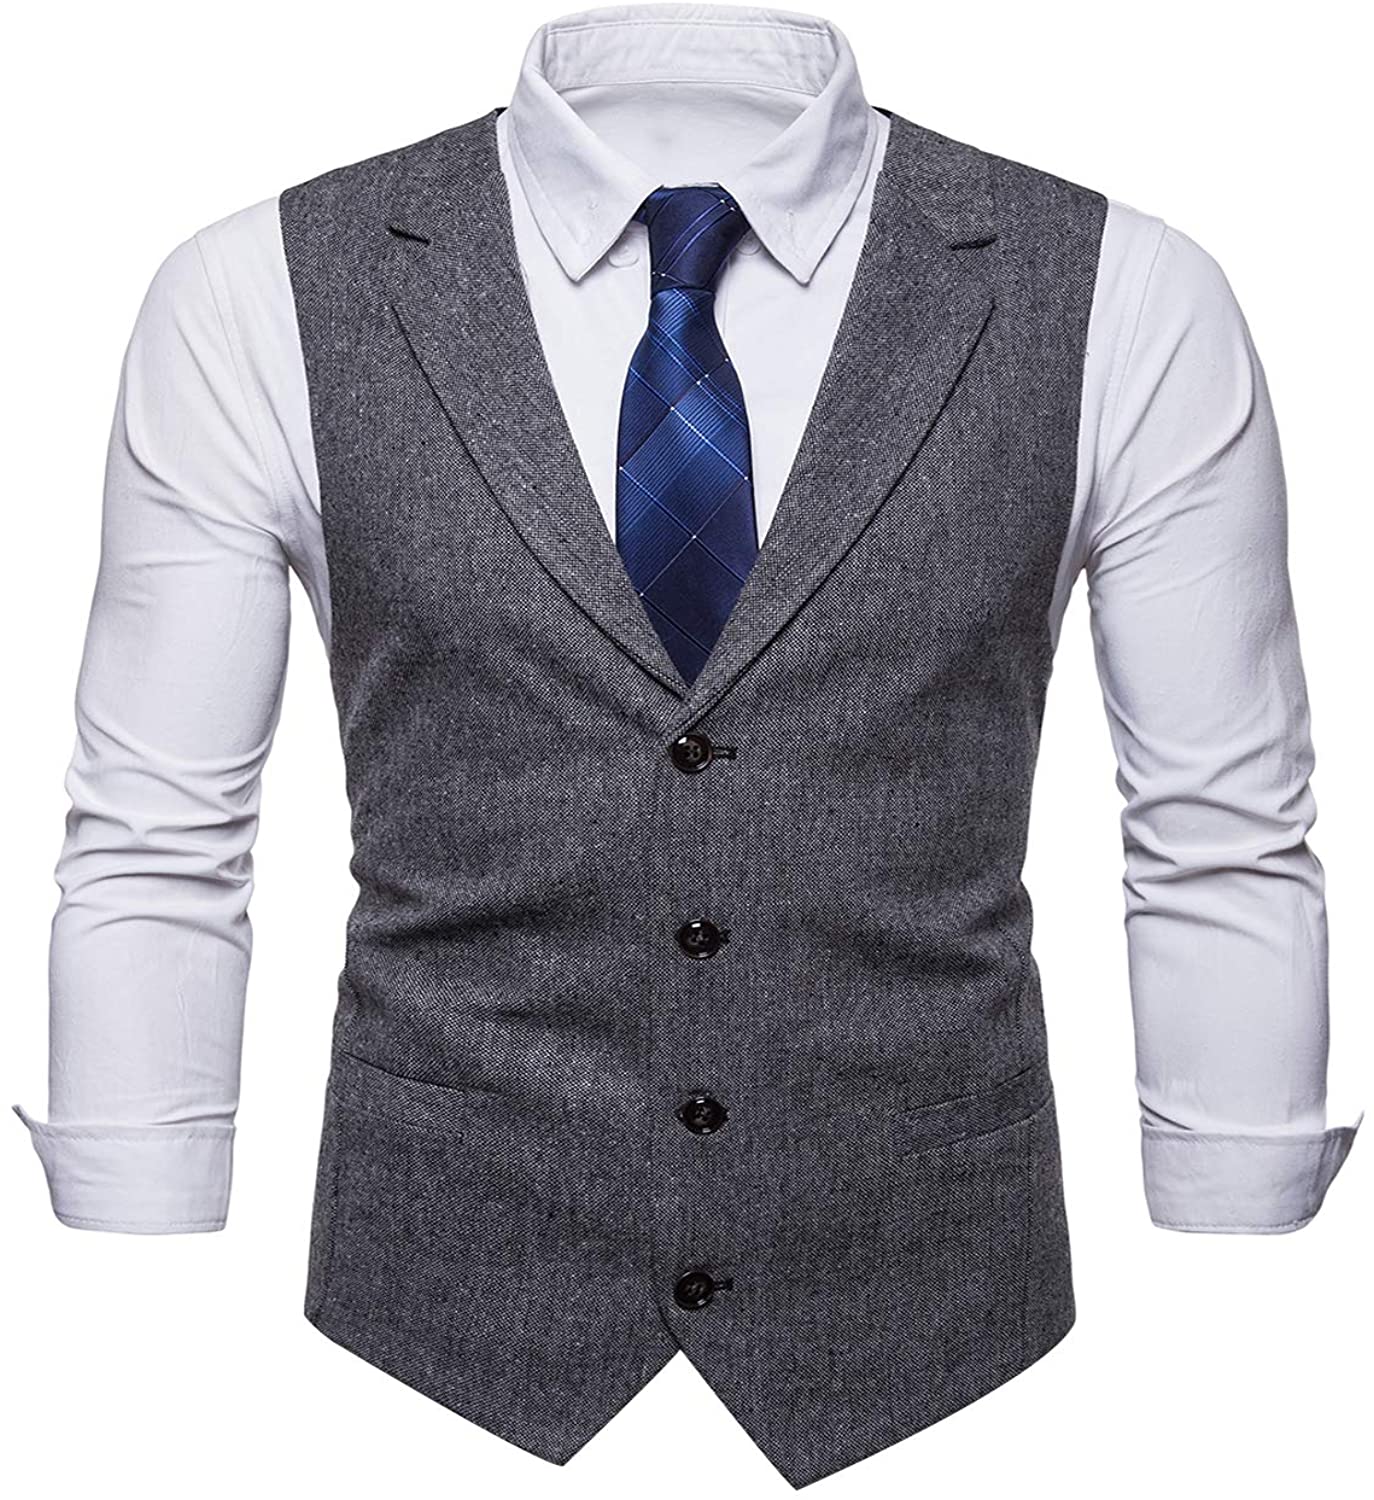 STTLZMC Mens Casual Dress Vests 4 Button Tailored Collar Tweed Suit ...